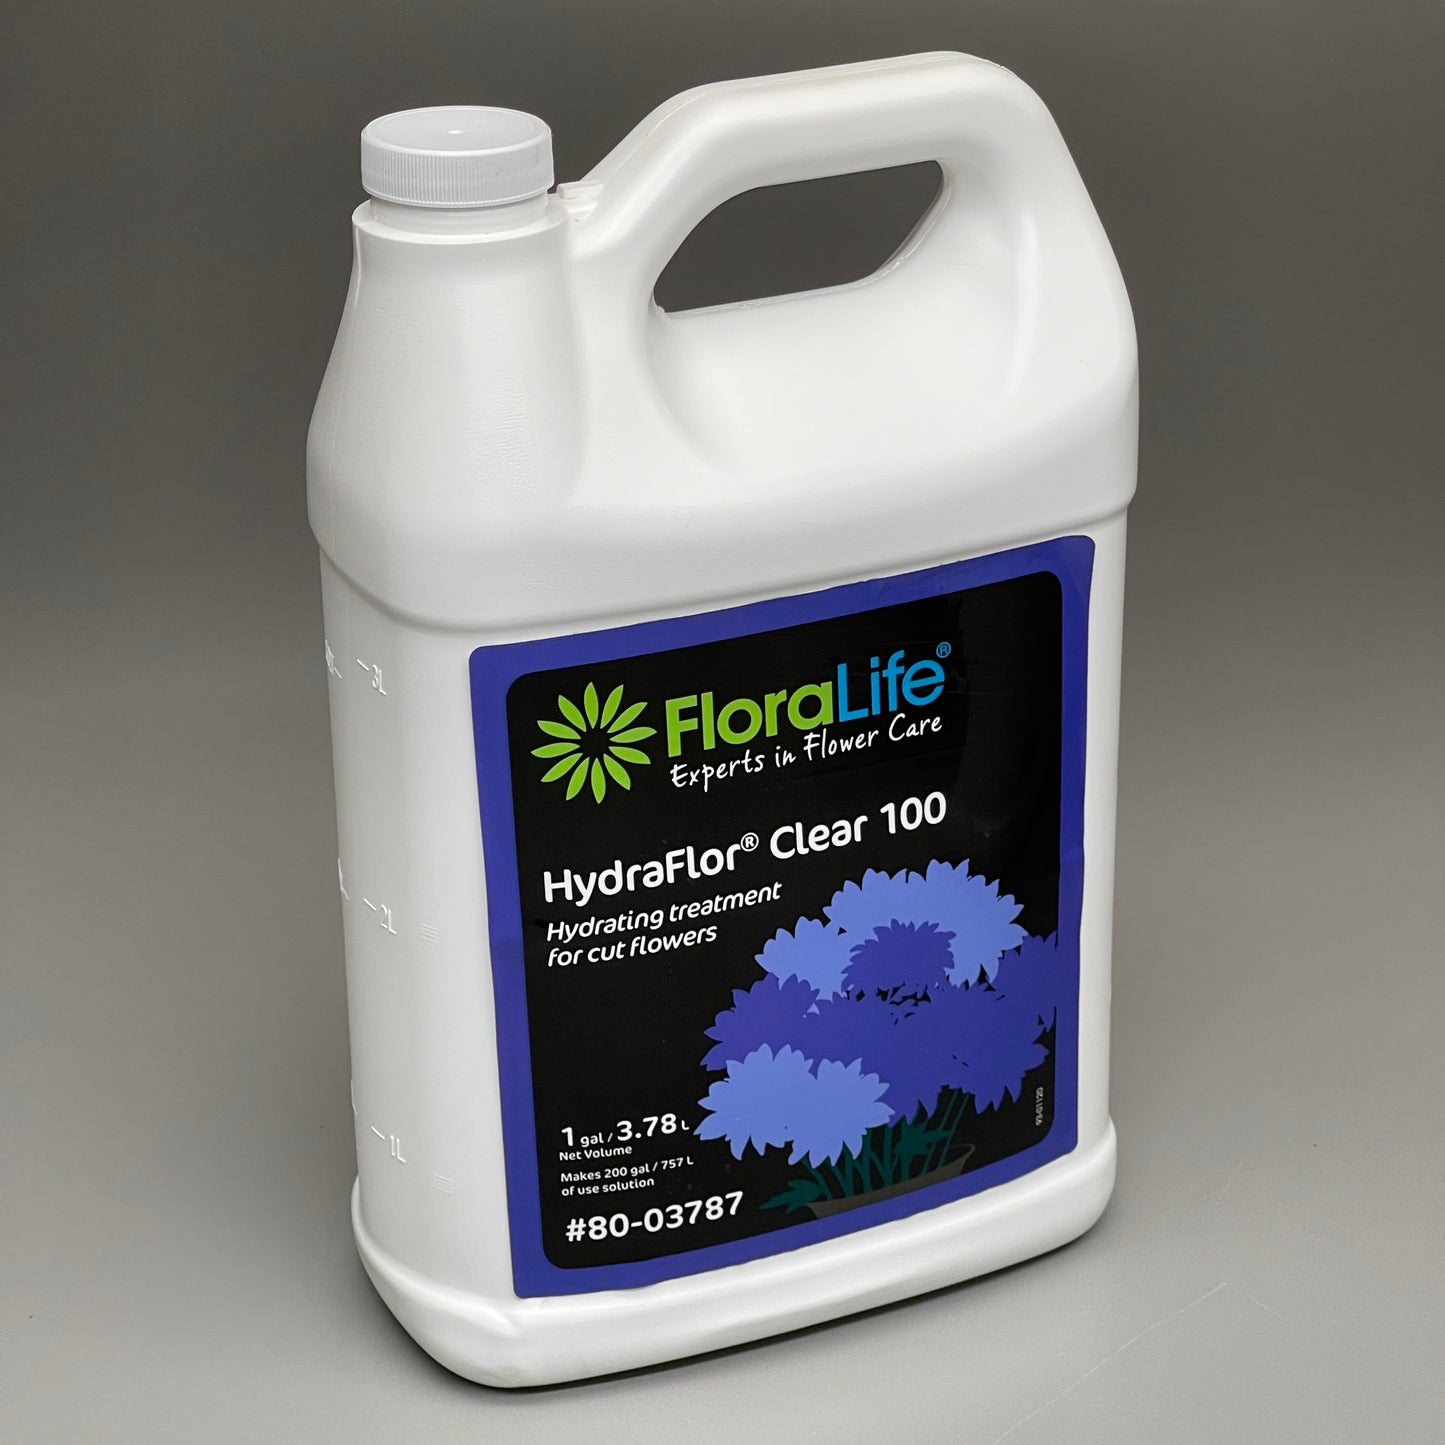 SMITHERS OASIS FloraLife Hydraflor Clear 100 Hydrating Treatment 1 Gallon (New)